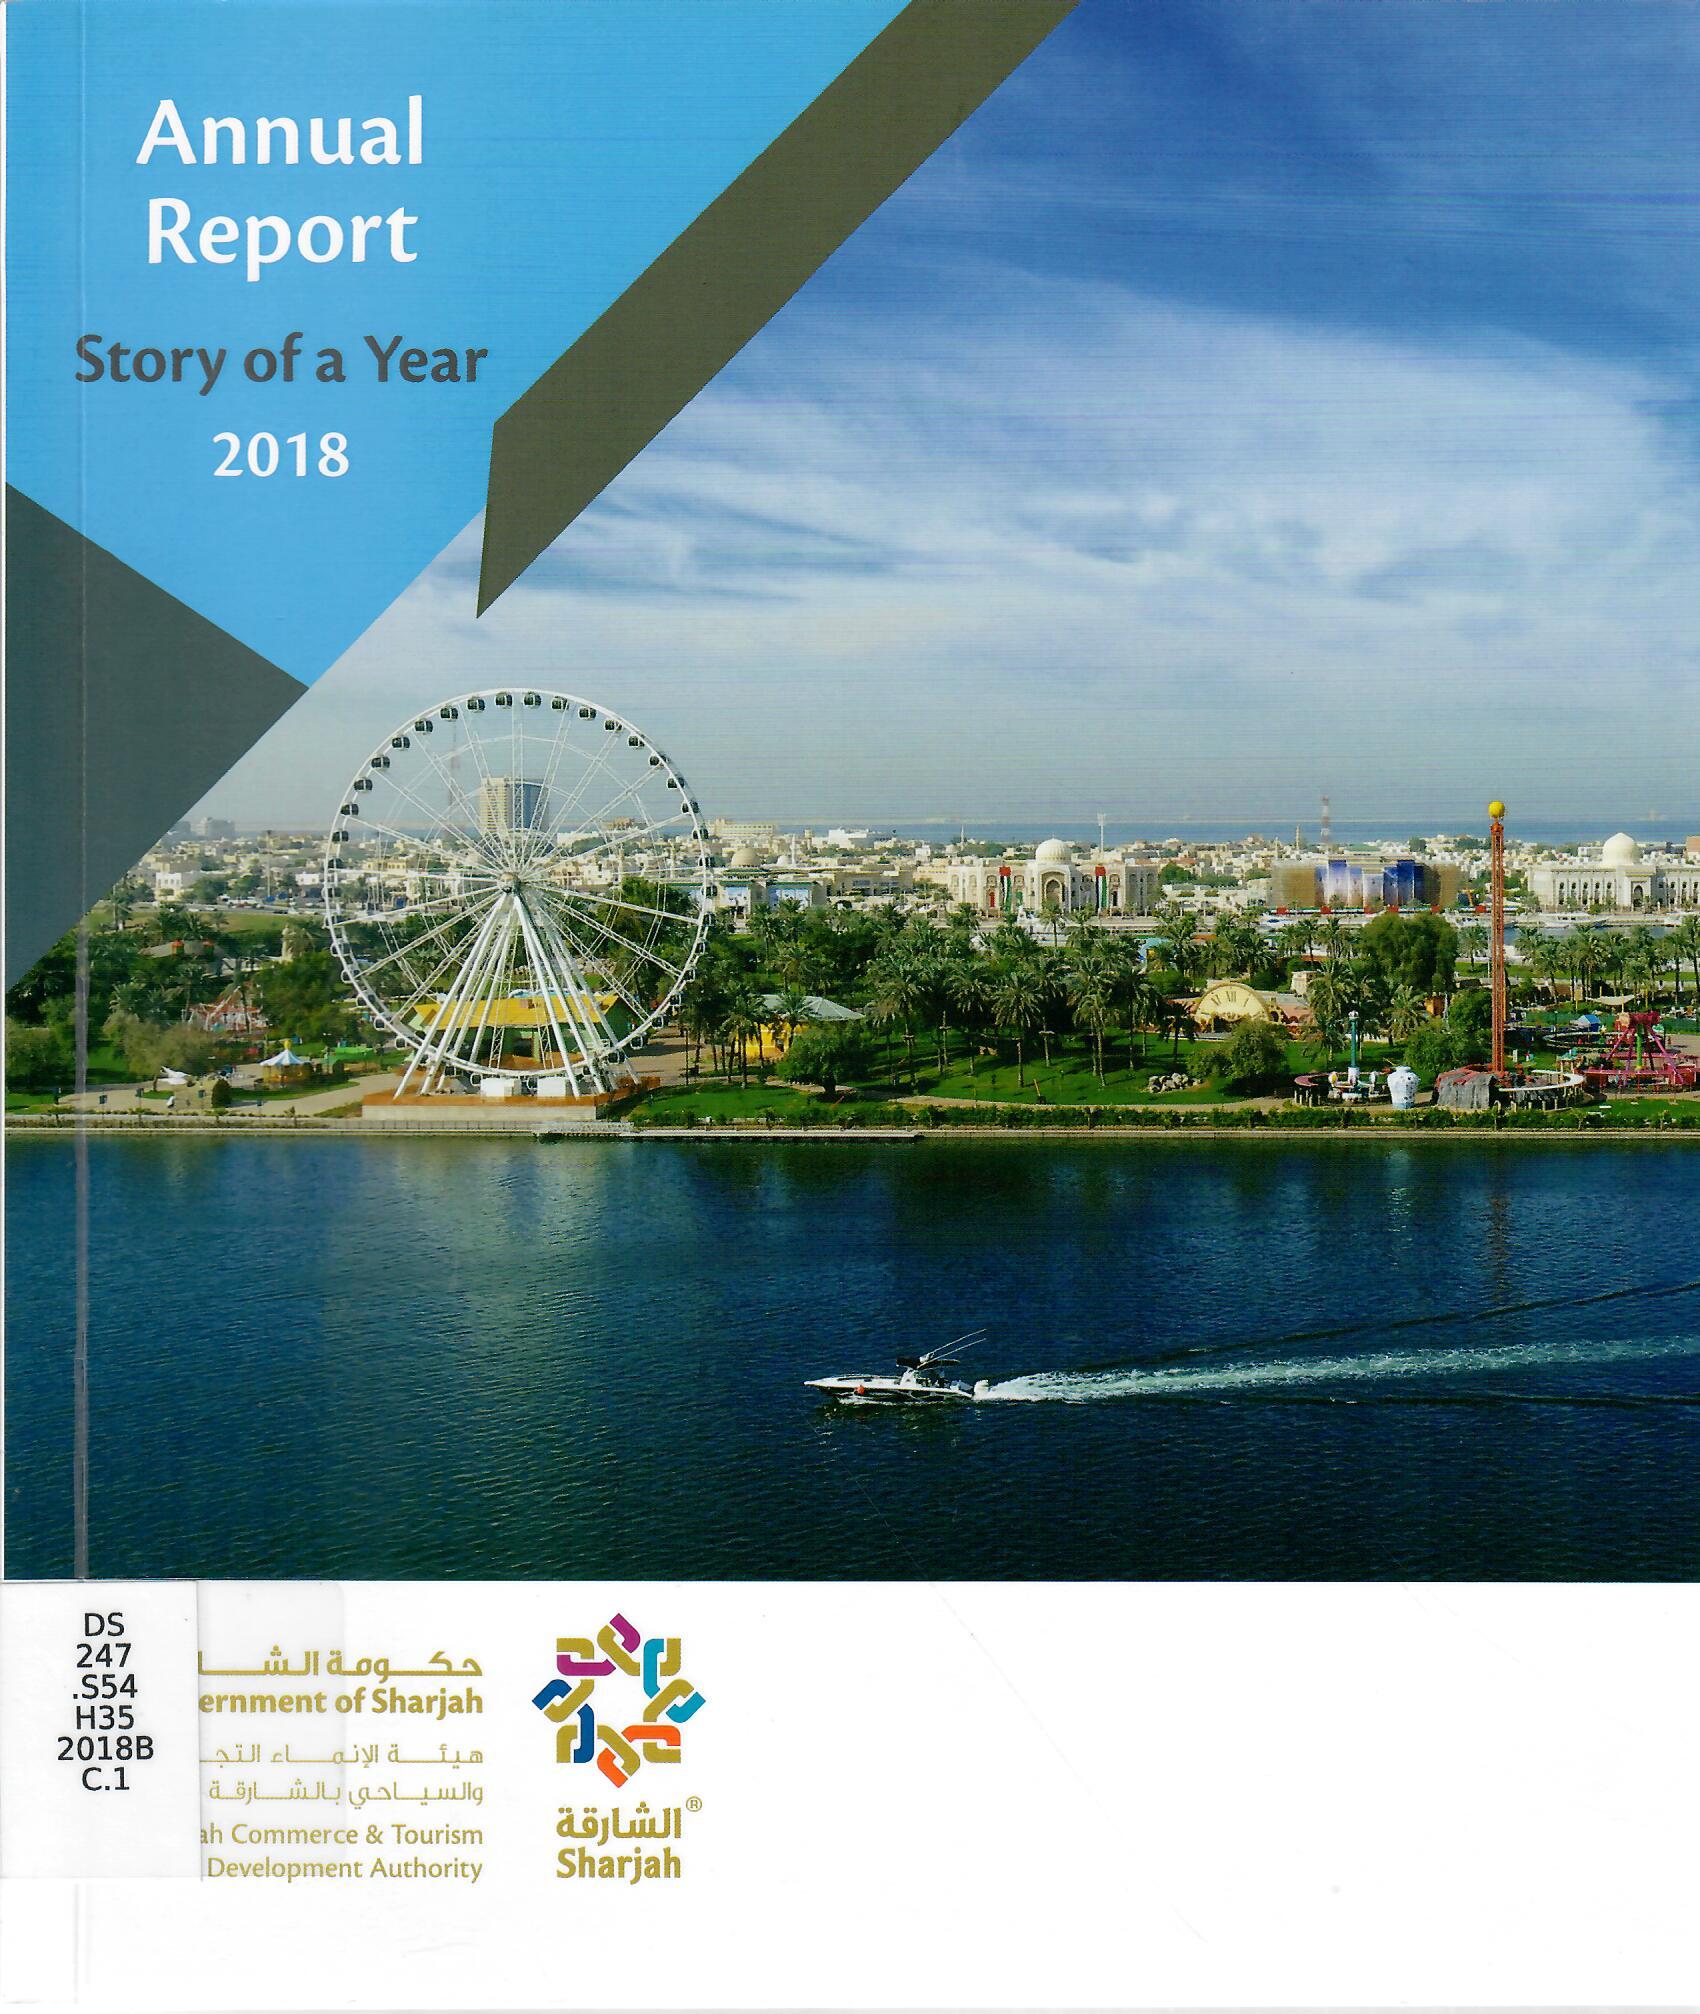 Annual Report Story of a Year 2018